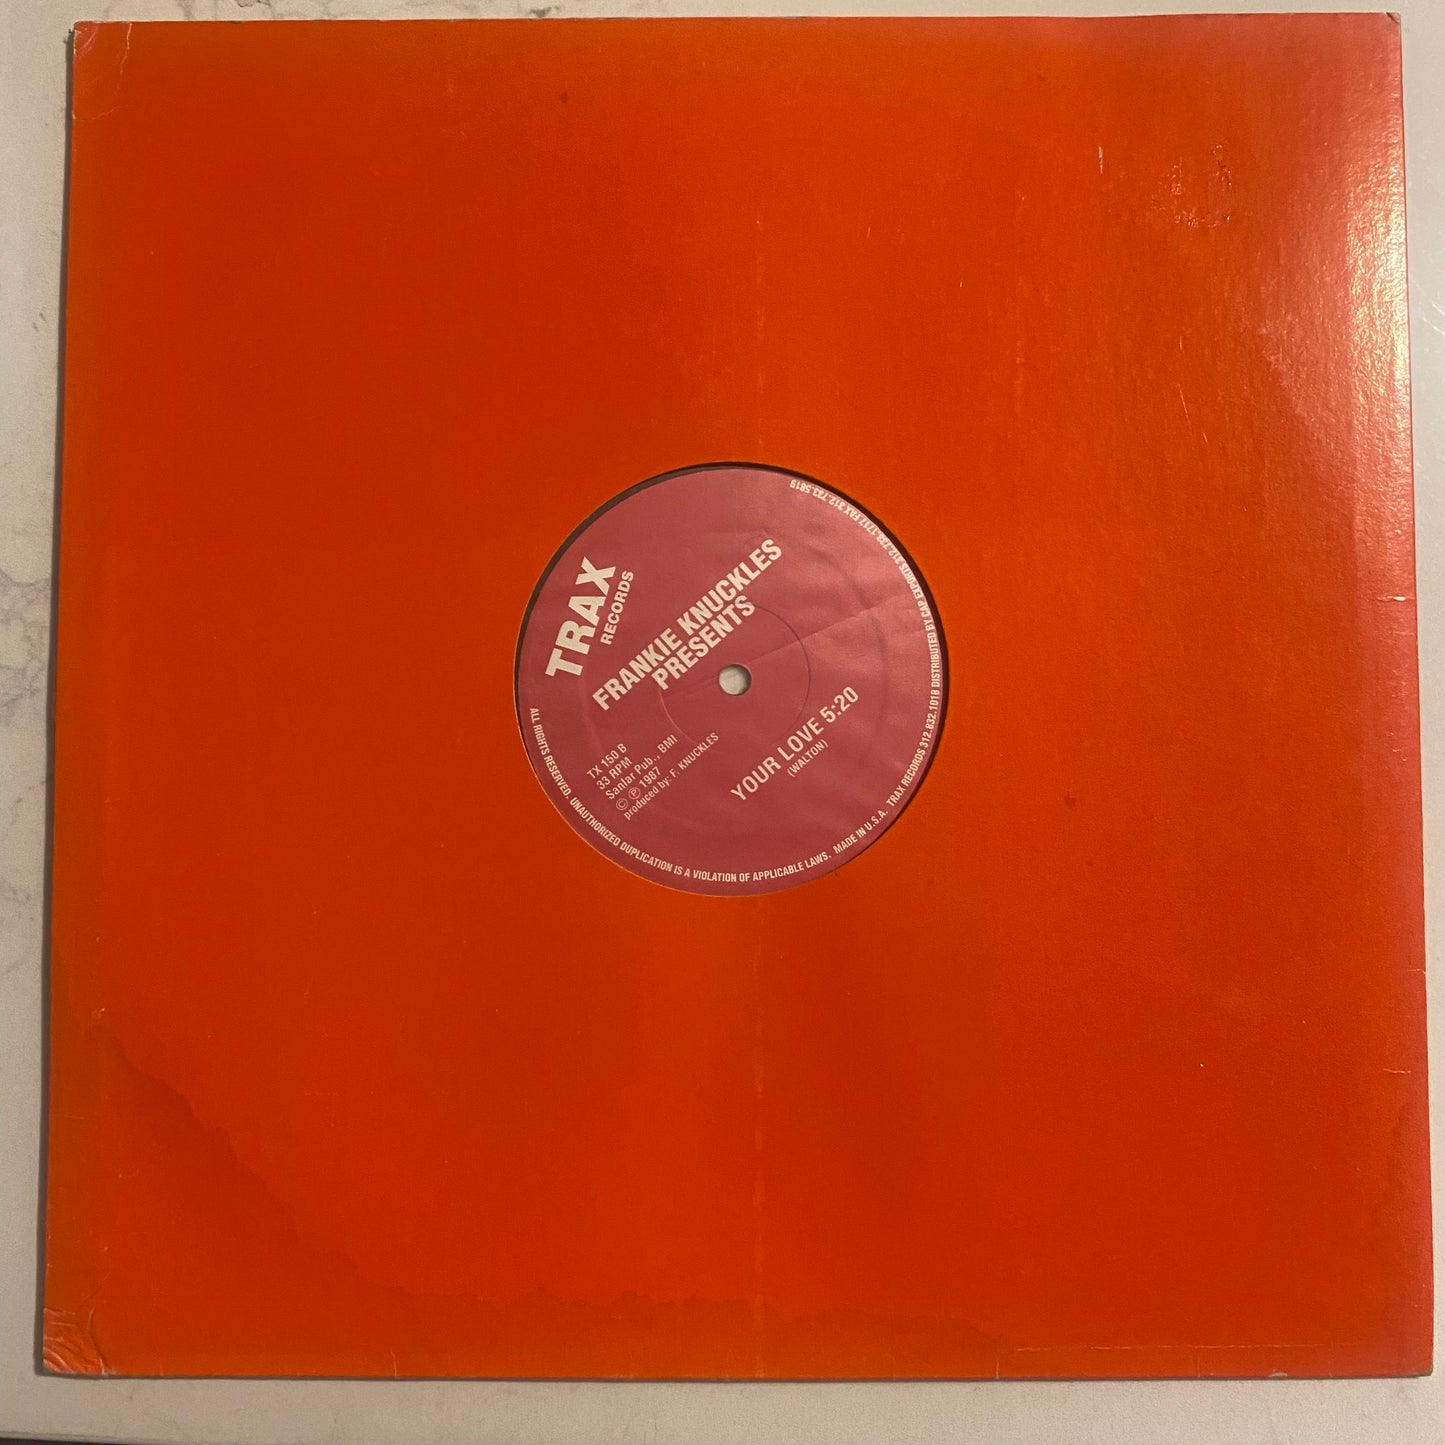 Frankie Knuckles - Baby Wants To Ride / Your Love (12", RE)